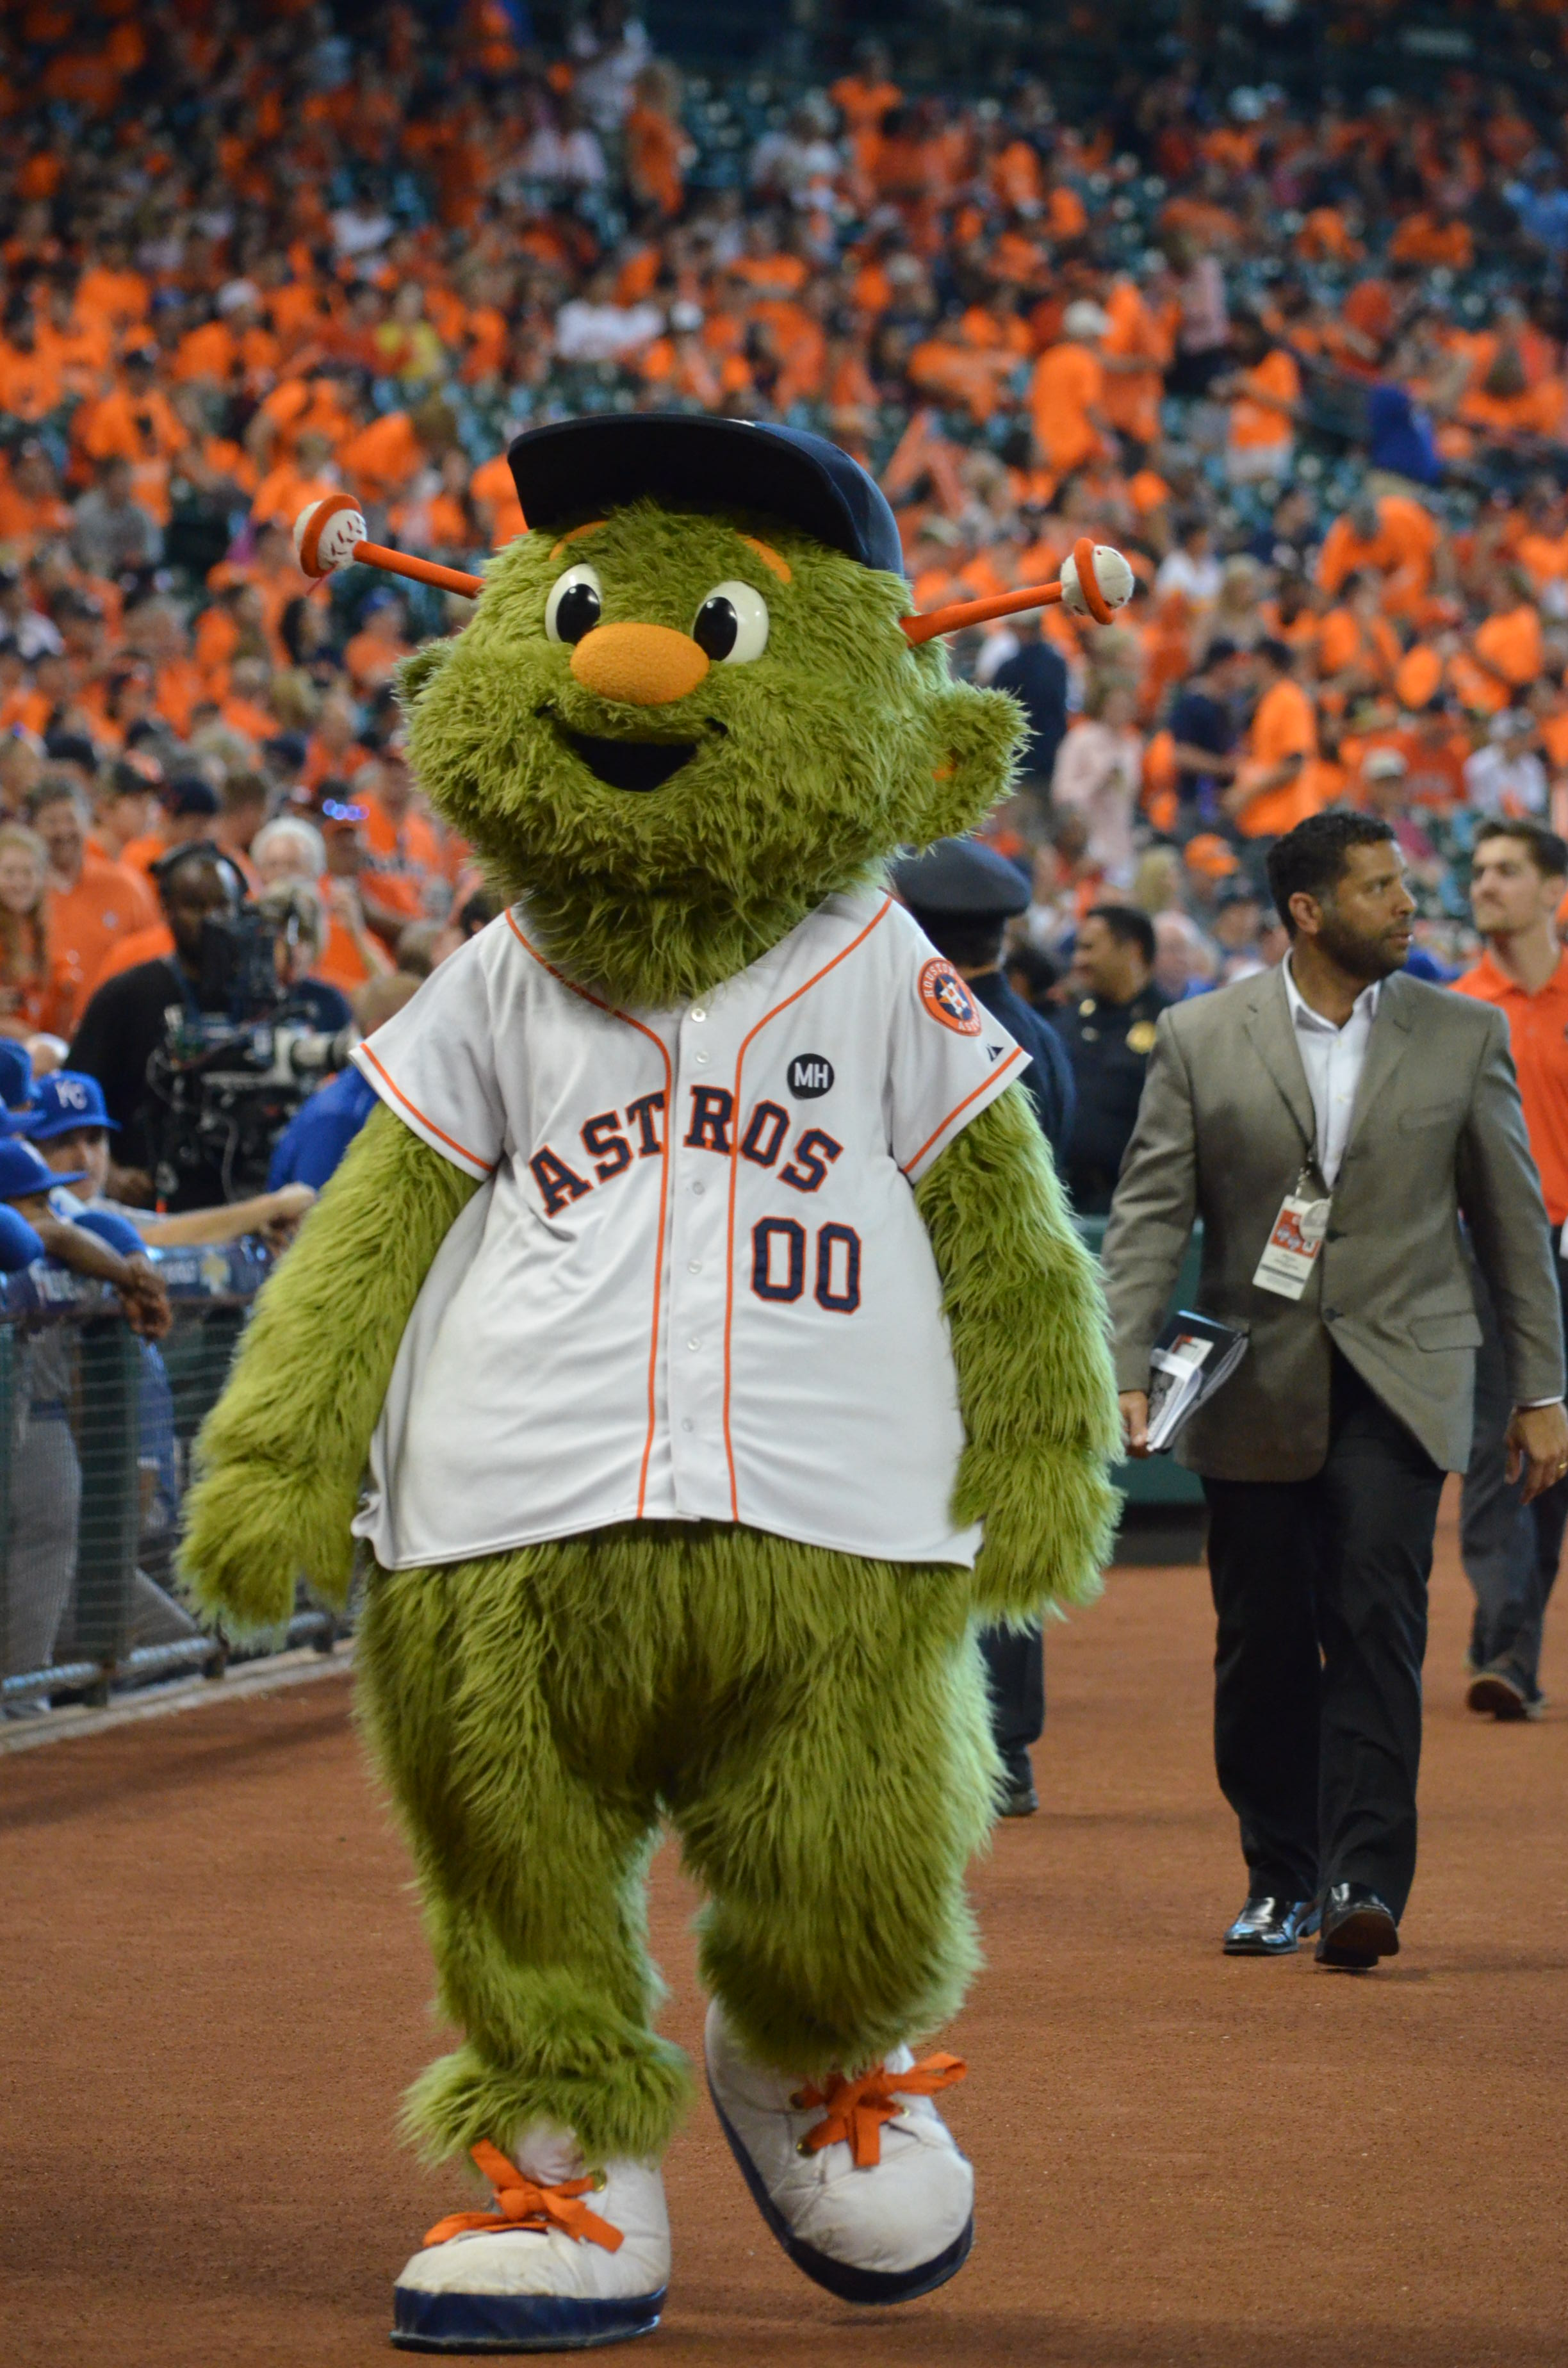 Calling all Astros fans: Orbit has the best work excuse letter for you